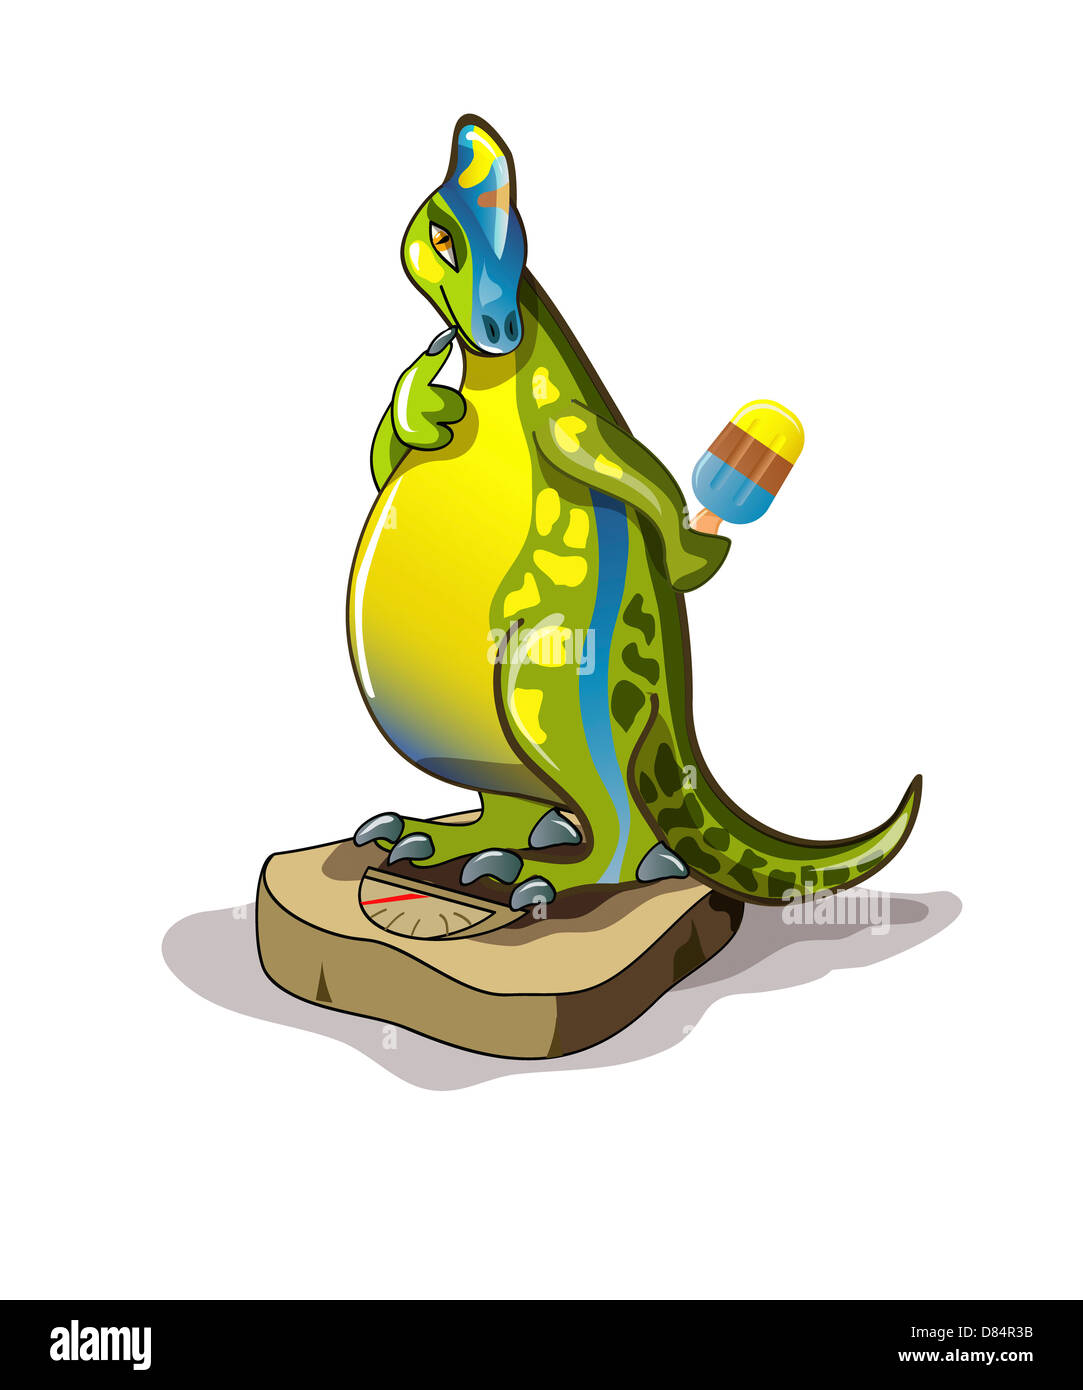 Illustration of a Lambeosaurus standing on a weight scale while holding ice cream behind its back. Stock Photo